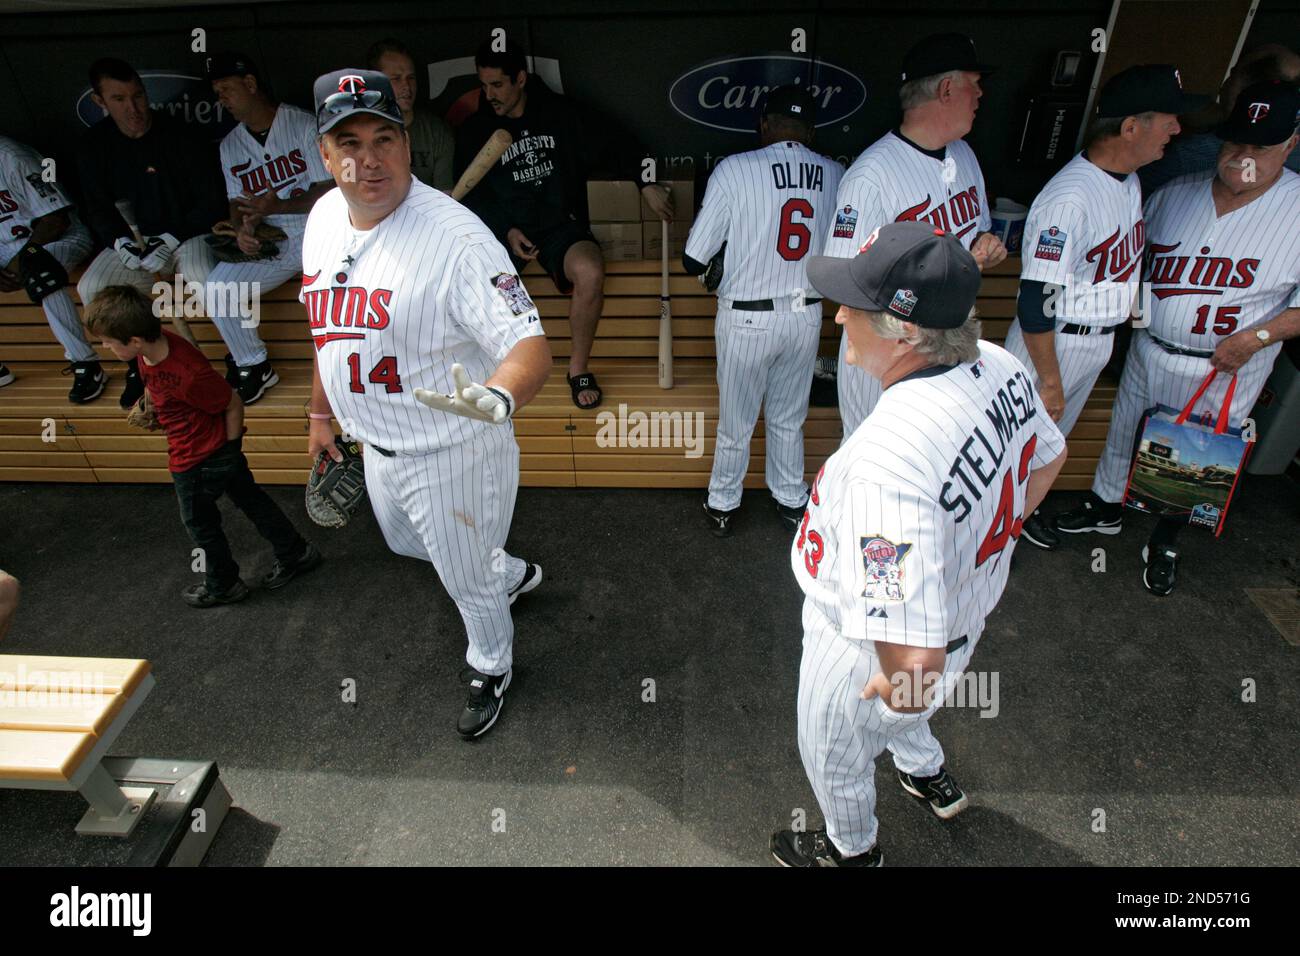 All-Star Game showed former Twins great Kent Hrbek no love, and